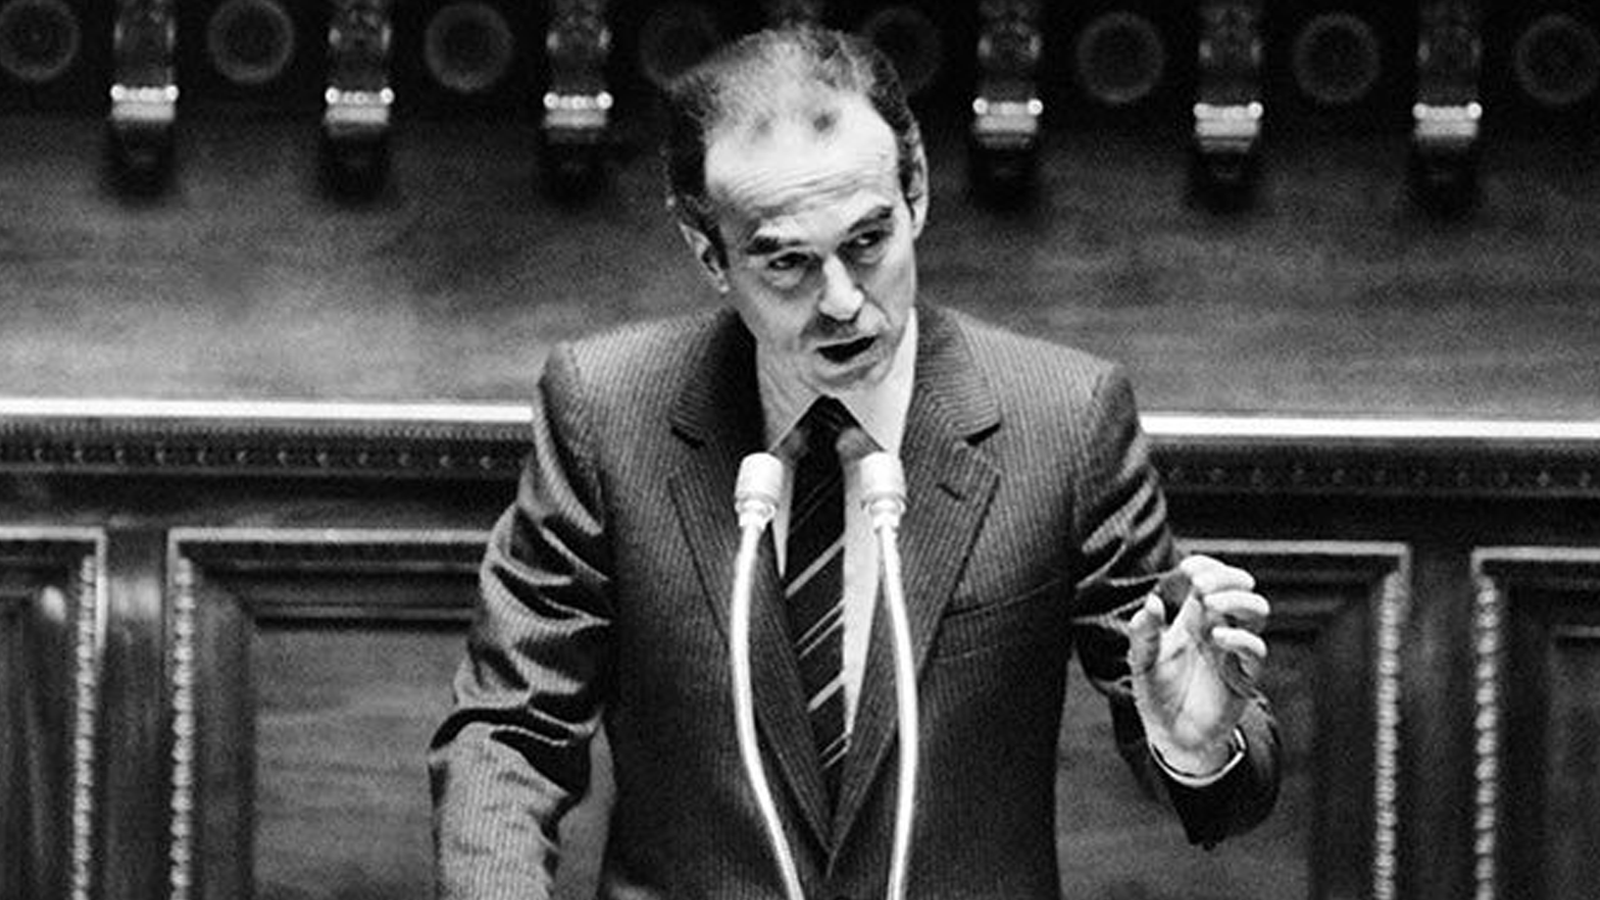 Robert Badinter gives his famous speech against the death penalty at the Palais Bourbon in 1981.